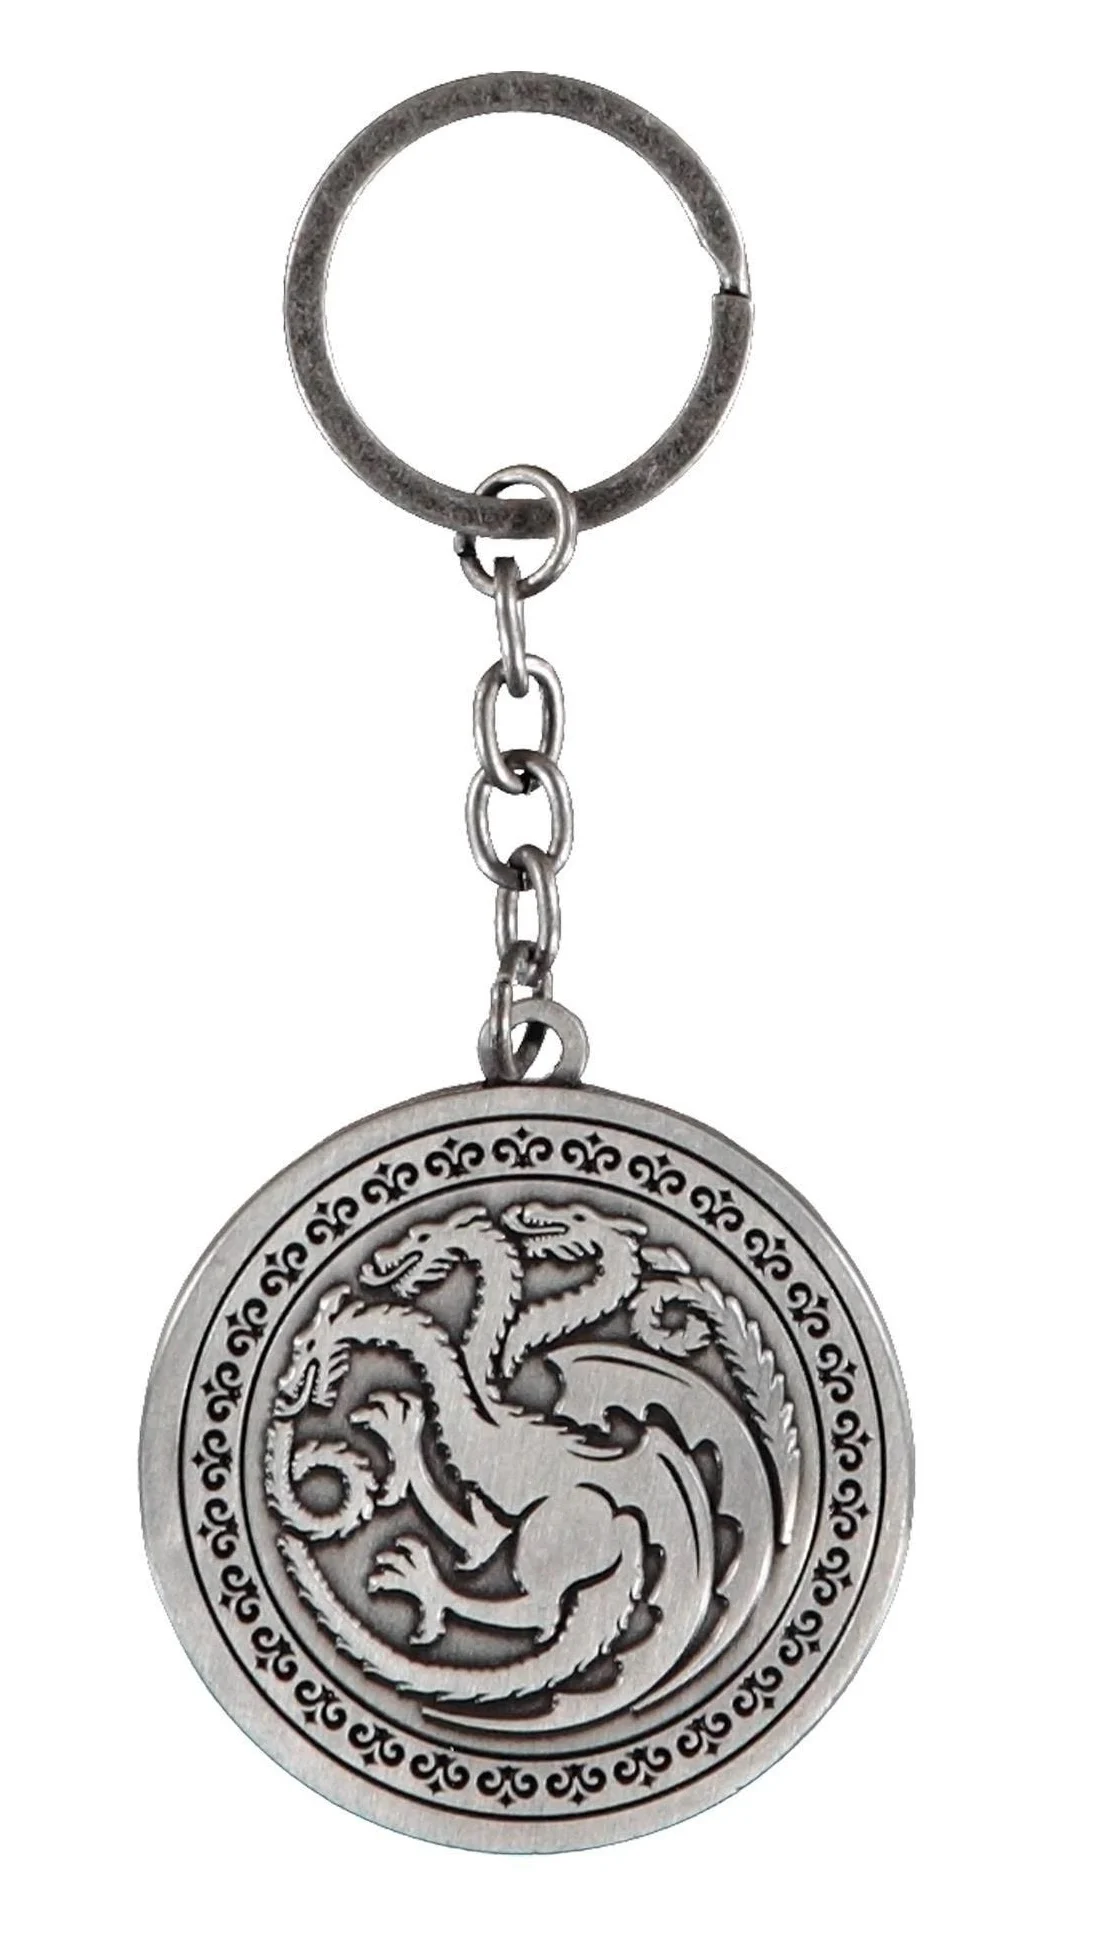 HOUSE OF THE DRAGON - Metal Keychain